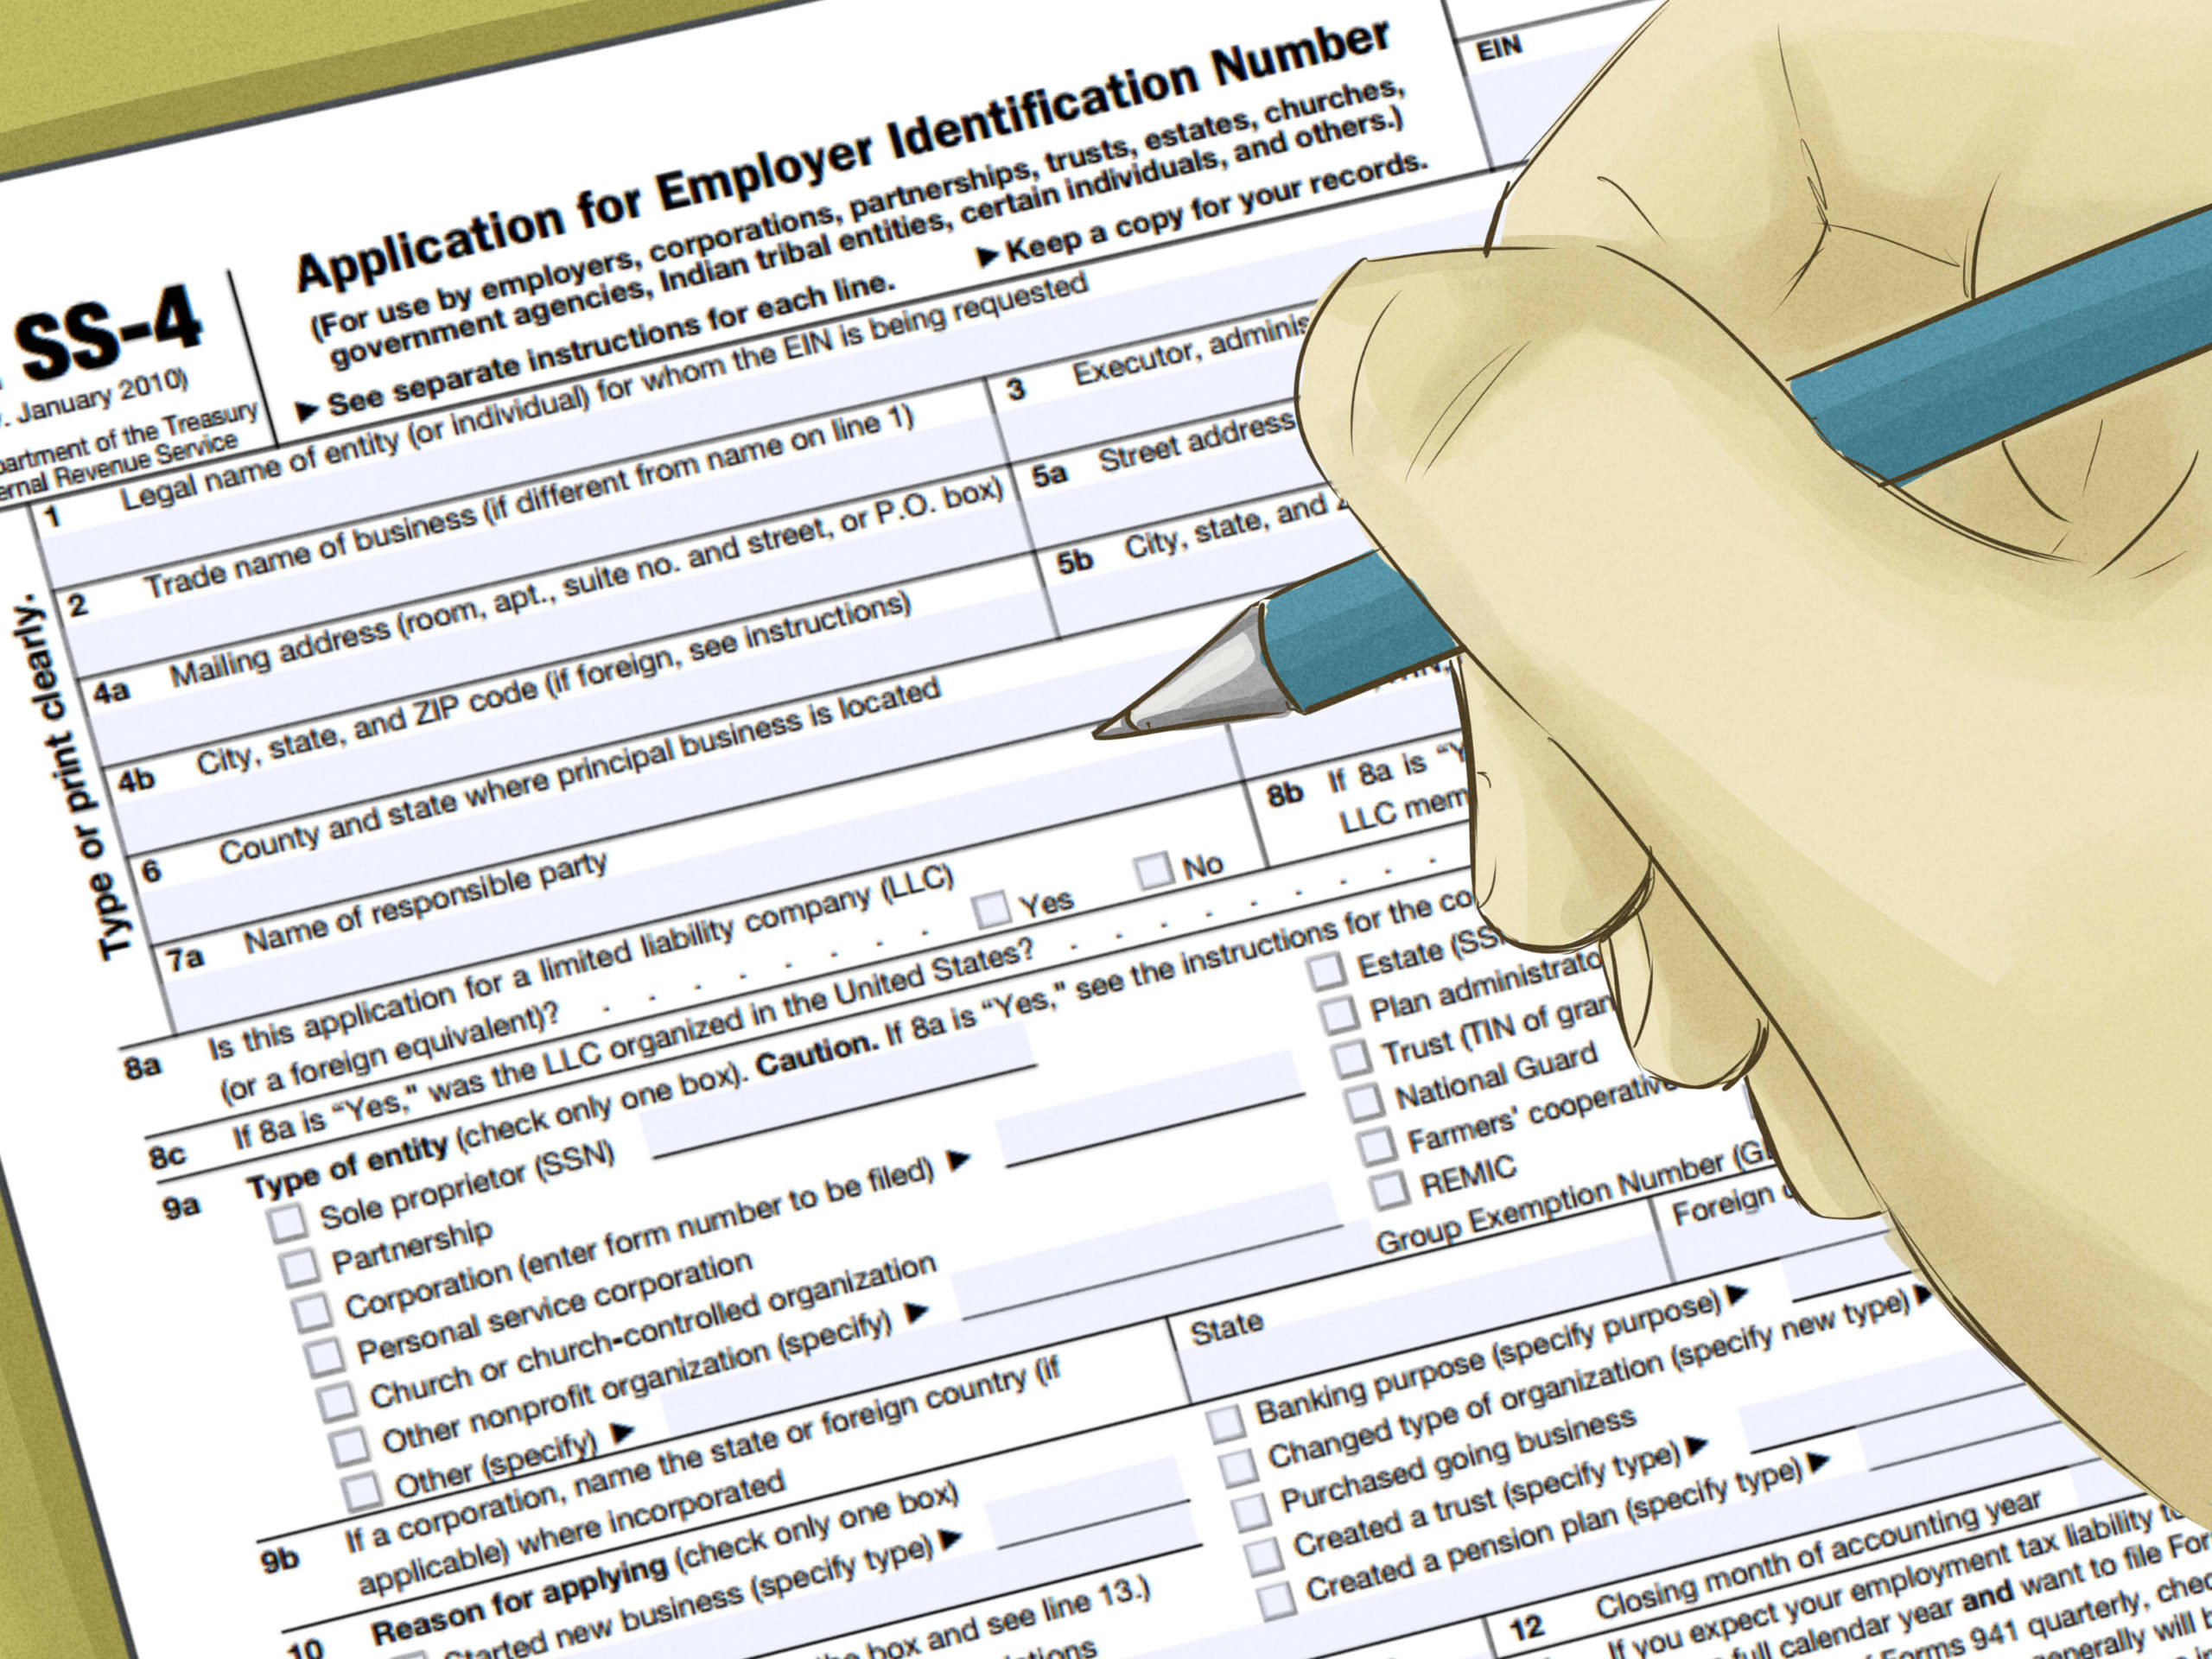 Federal Tax IDentification Number